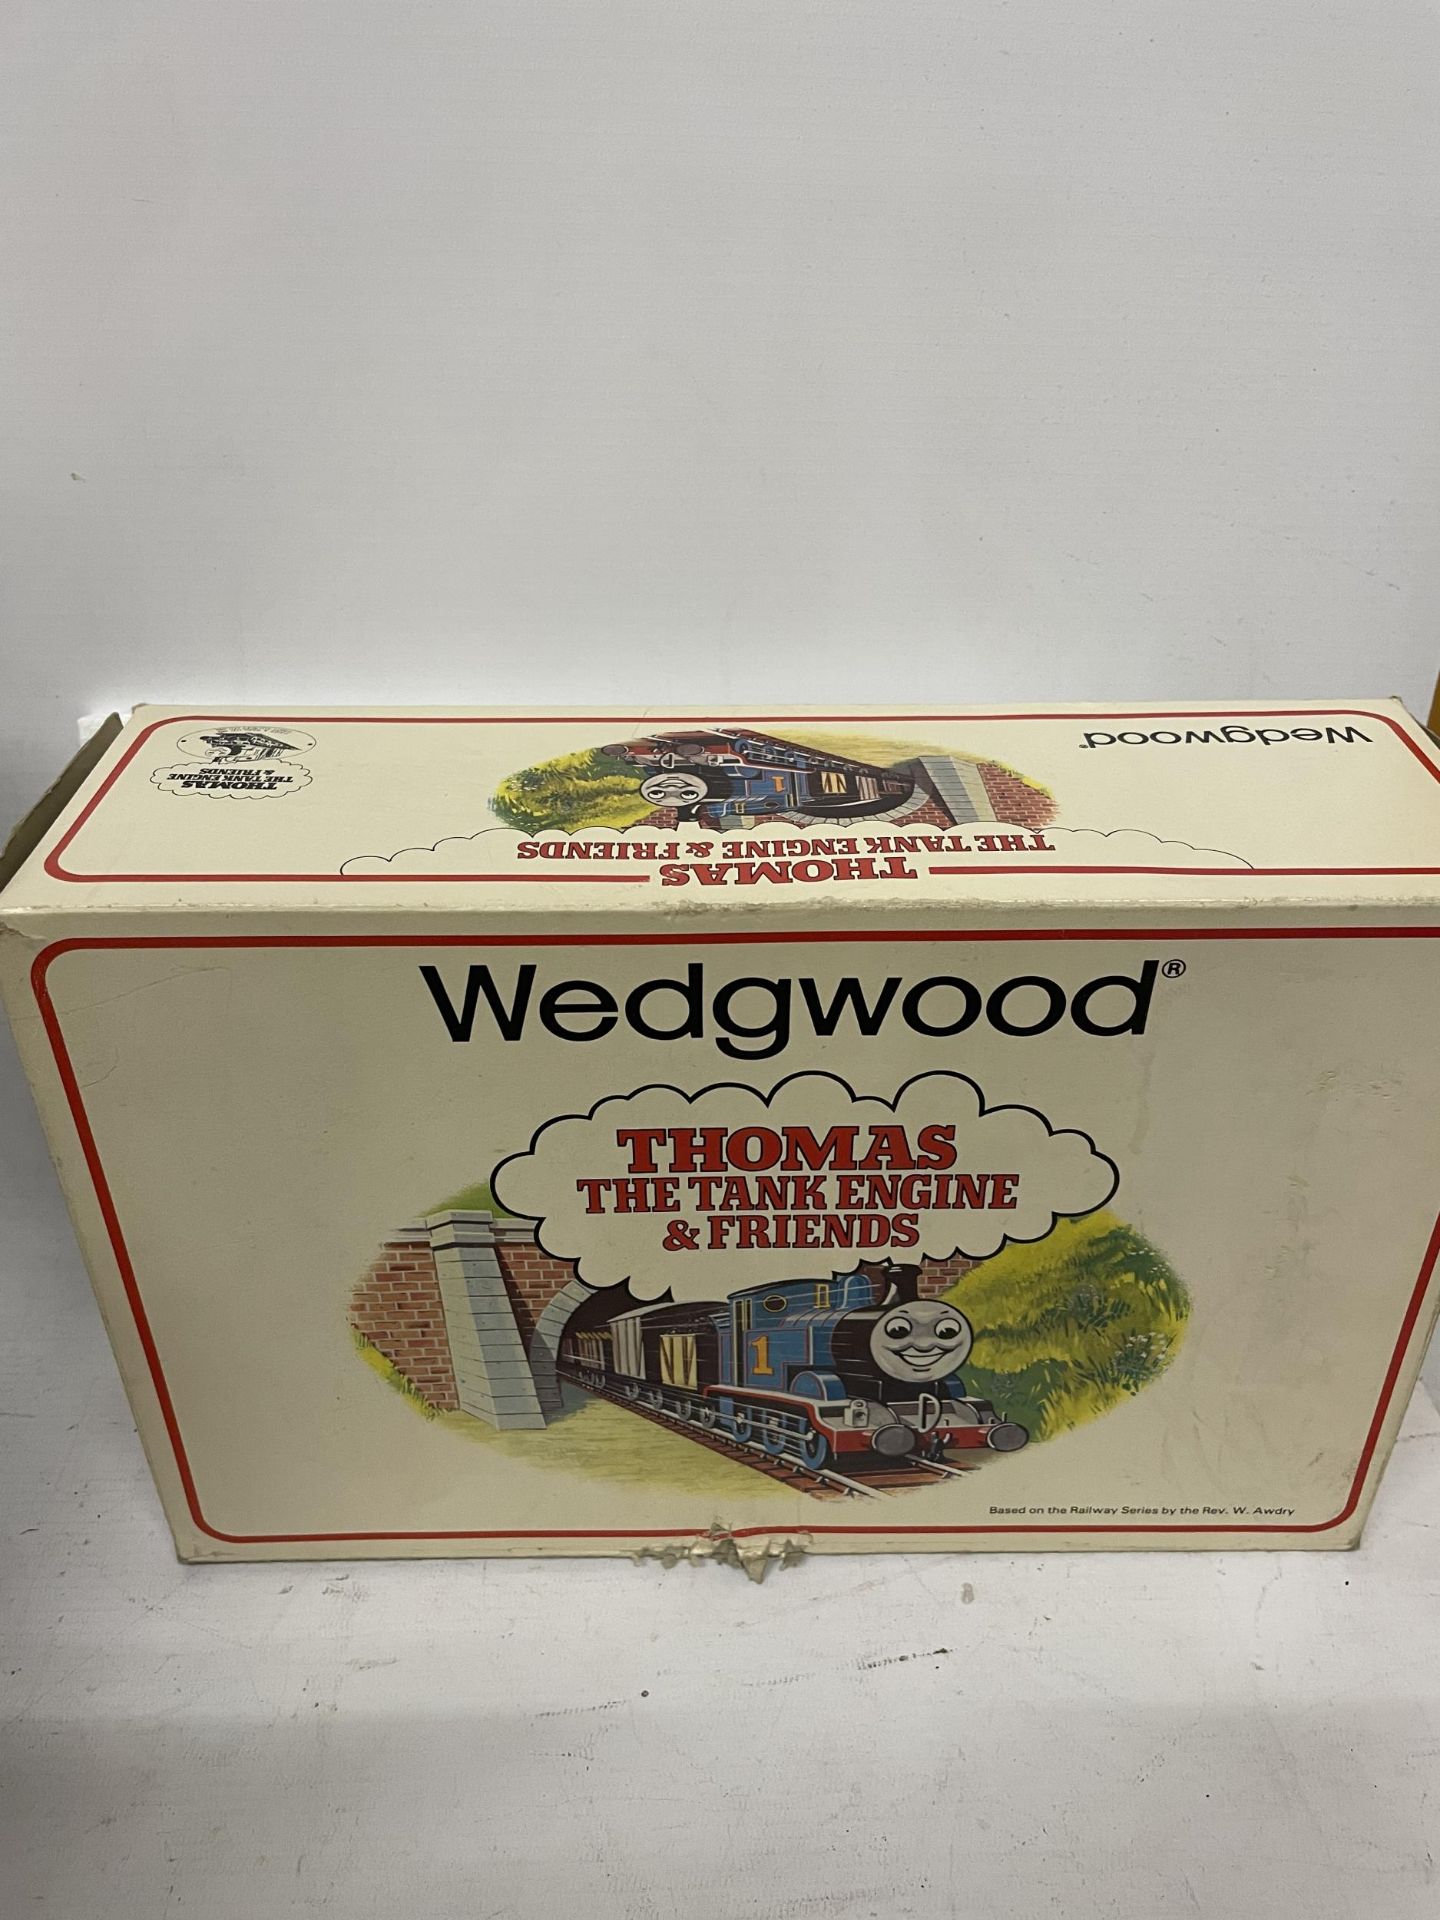 A BOXED WEDGWOOD THOMAS THE TANK ENGINE & FRIENDS SET - Image 4 of 4